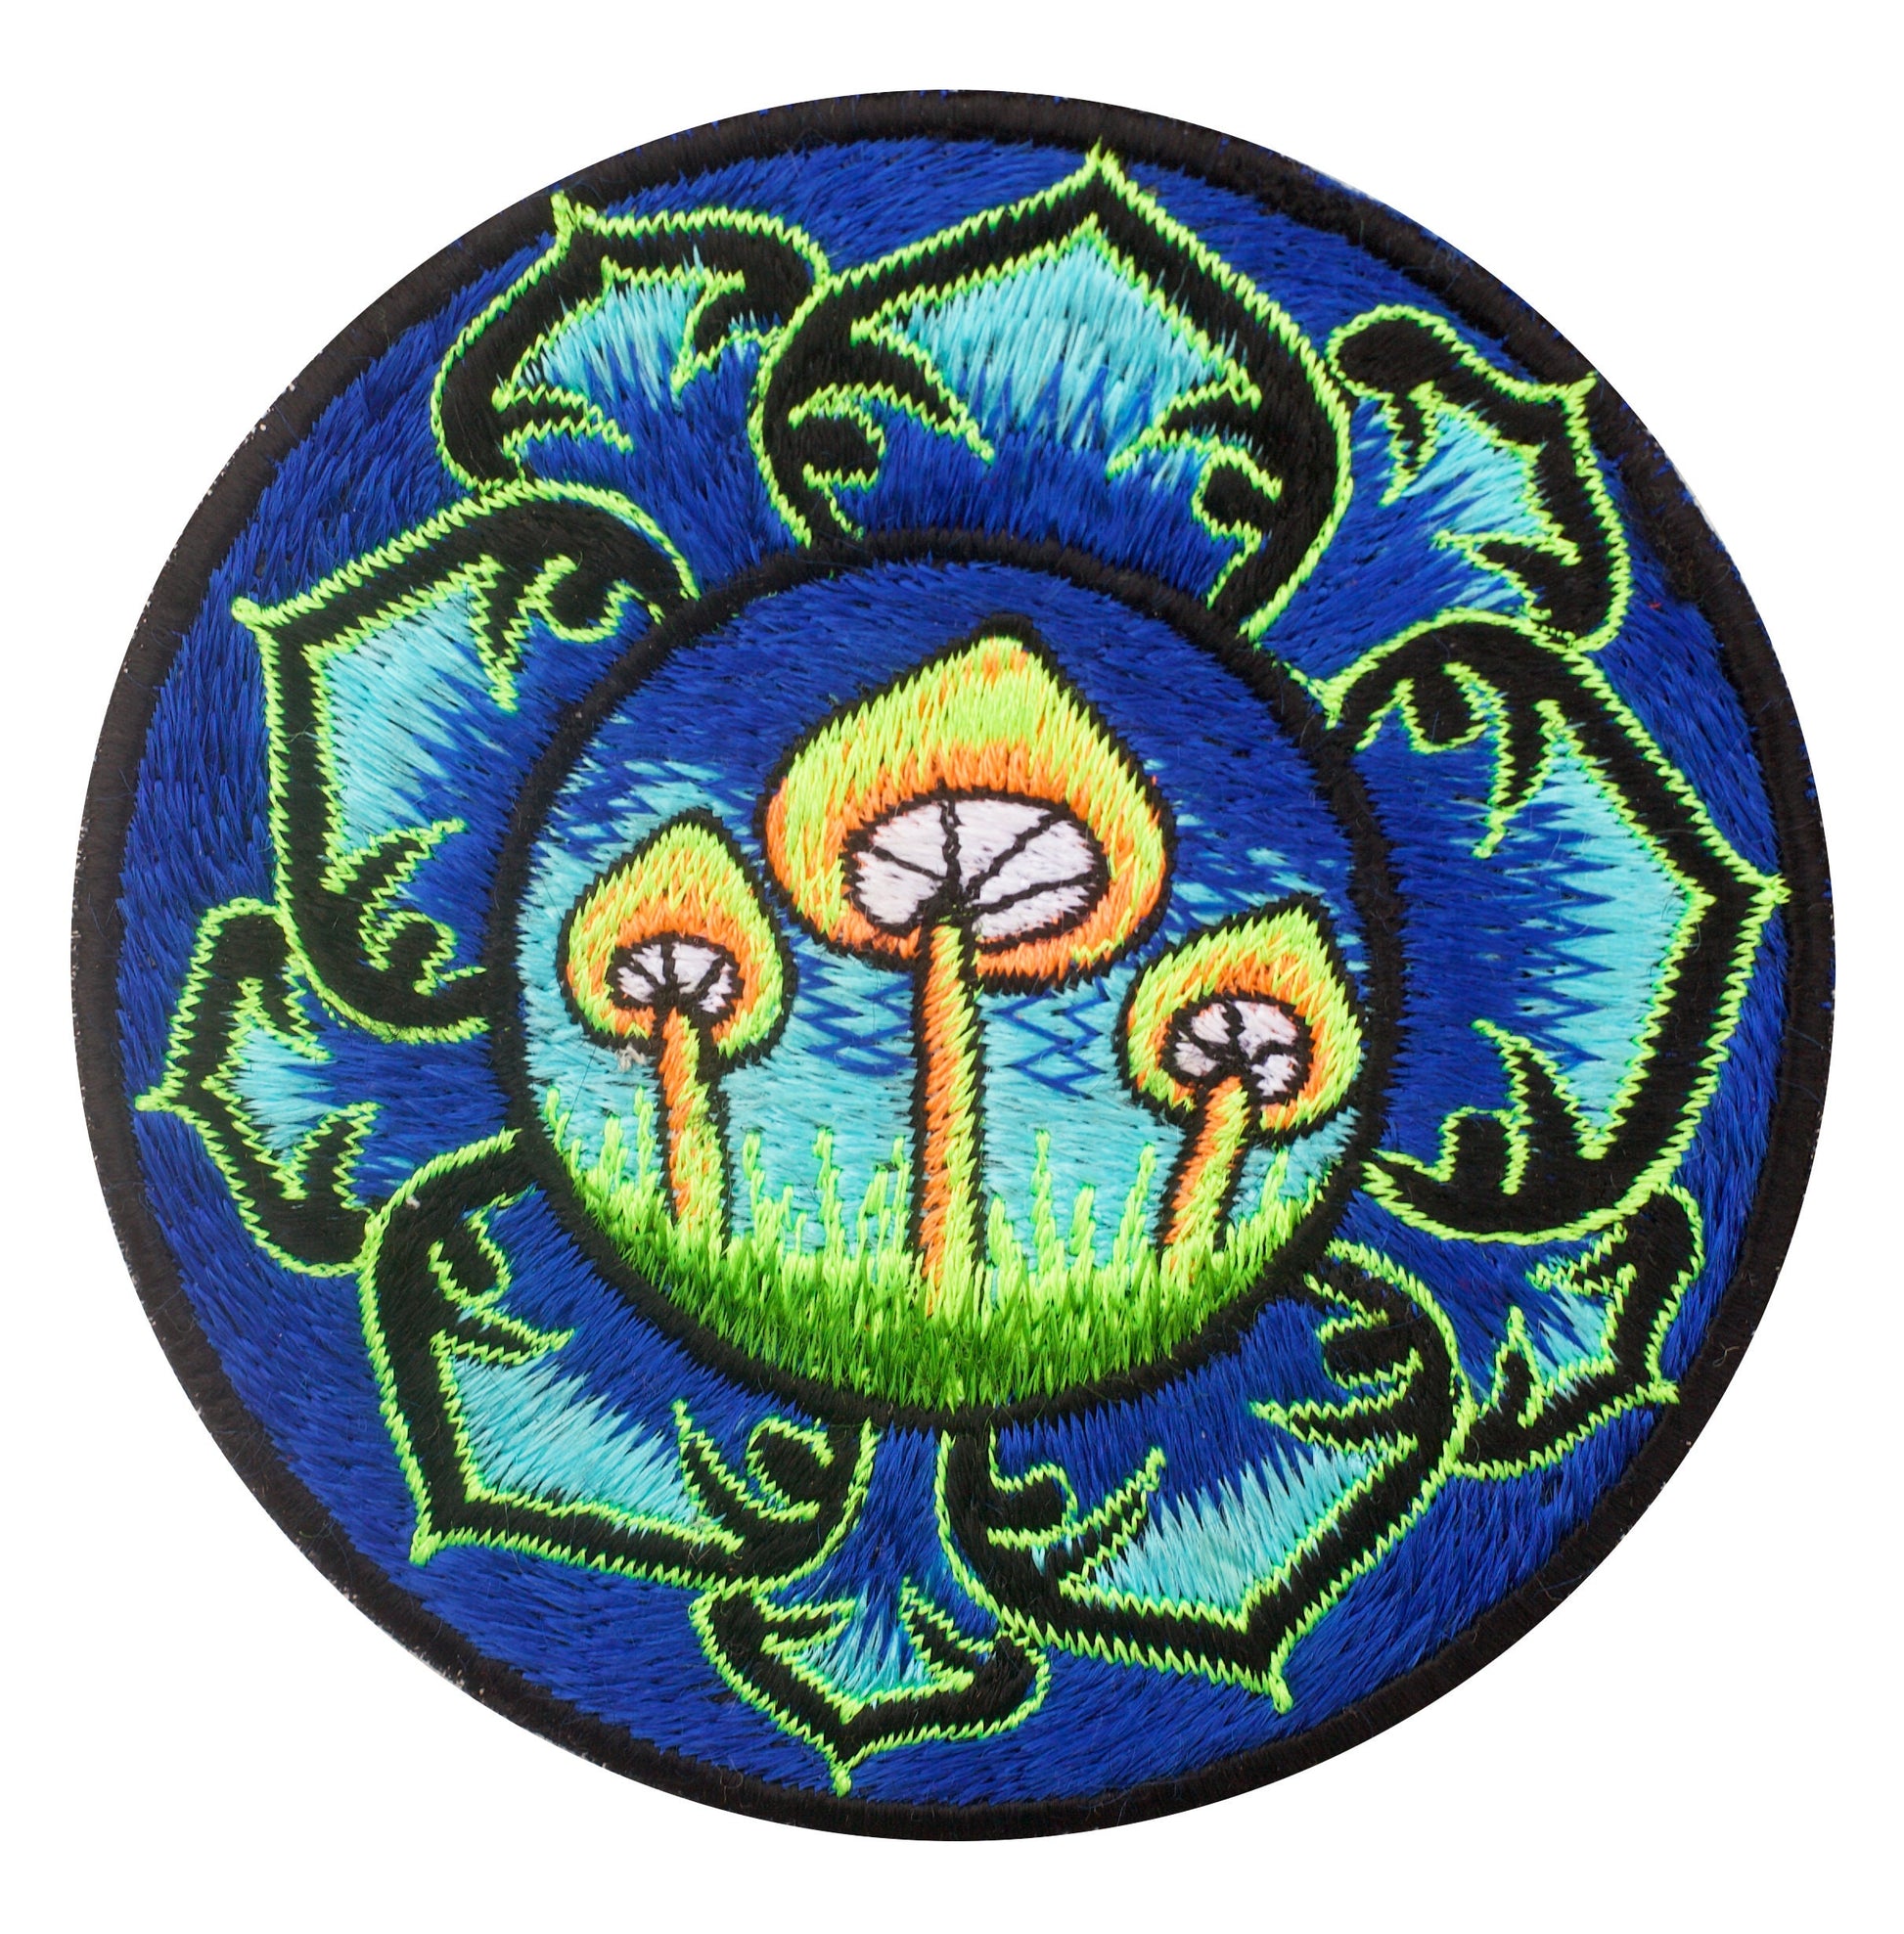 Magic mushroom mandala patch 3.5 inch psilocybin embroidery for sew on handcrafted Terence Mckenna